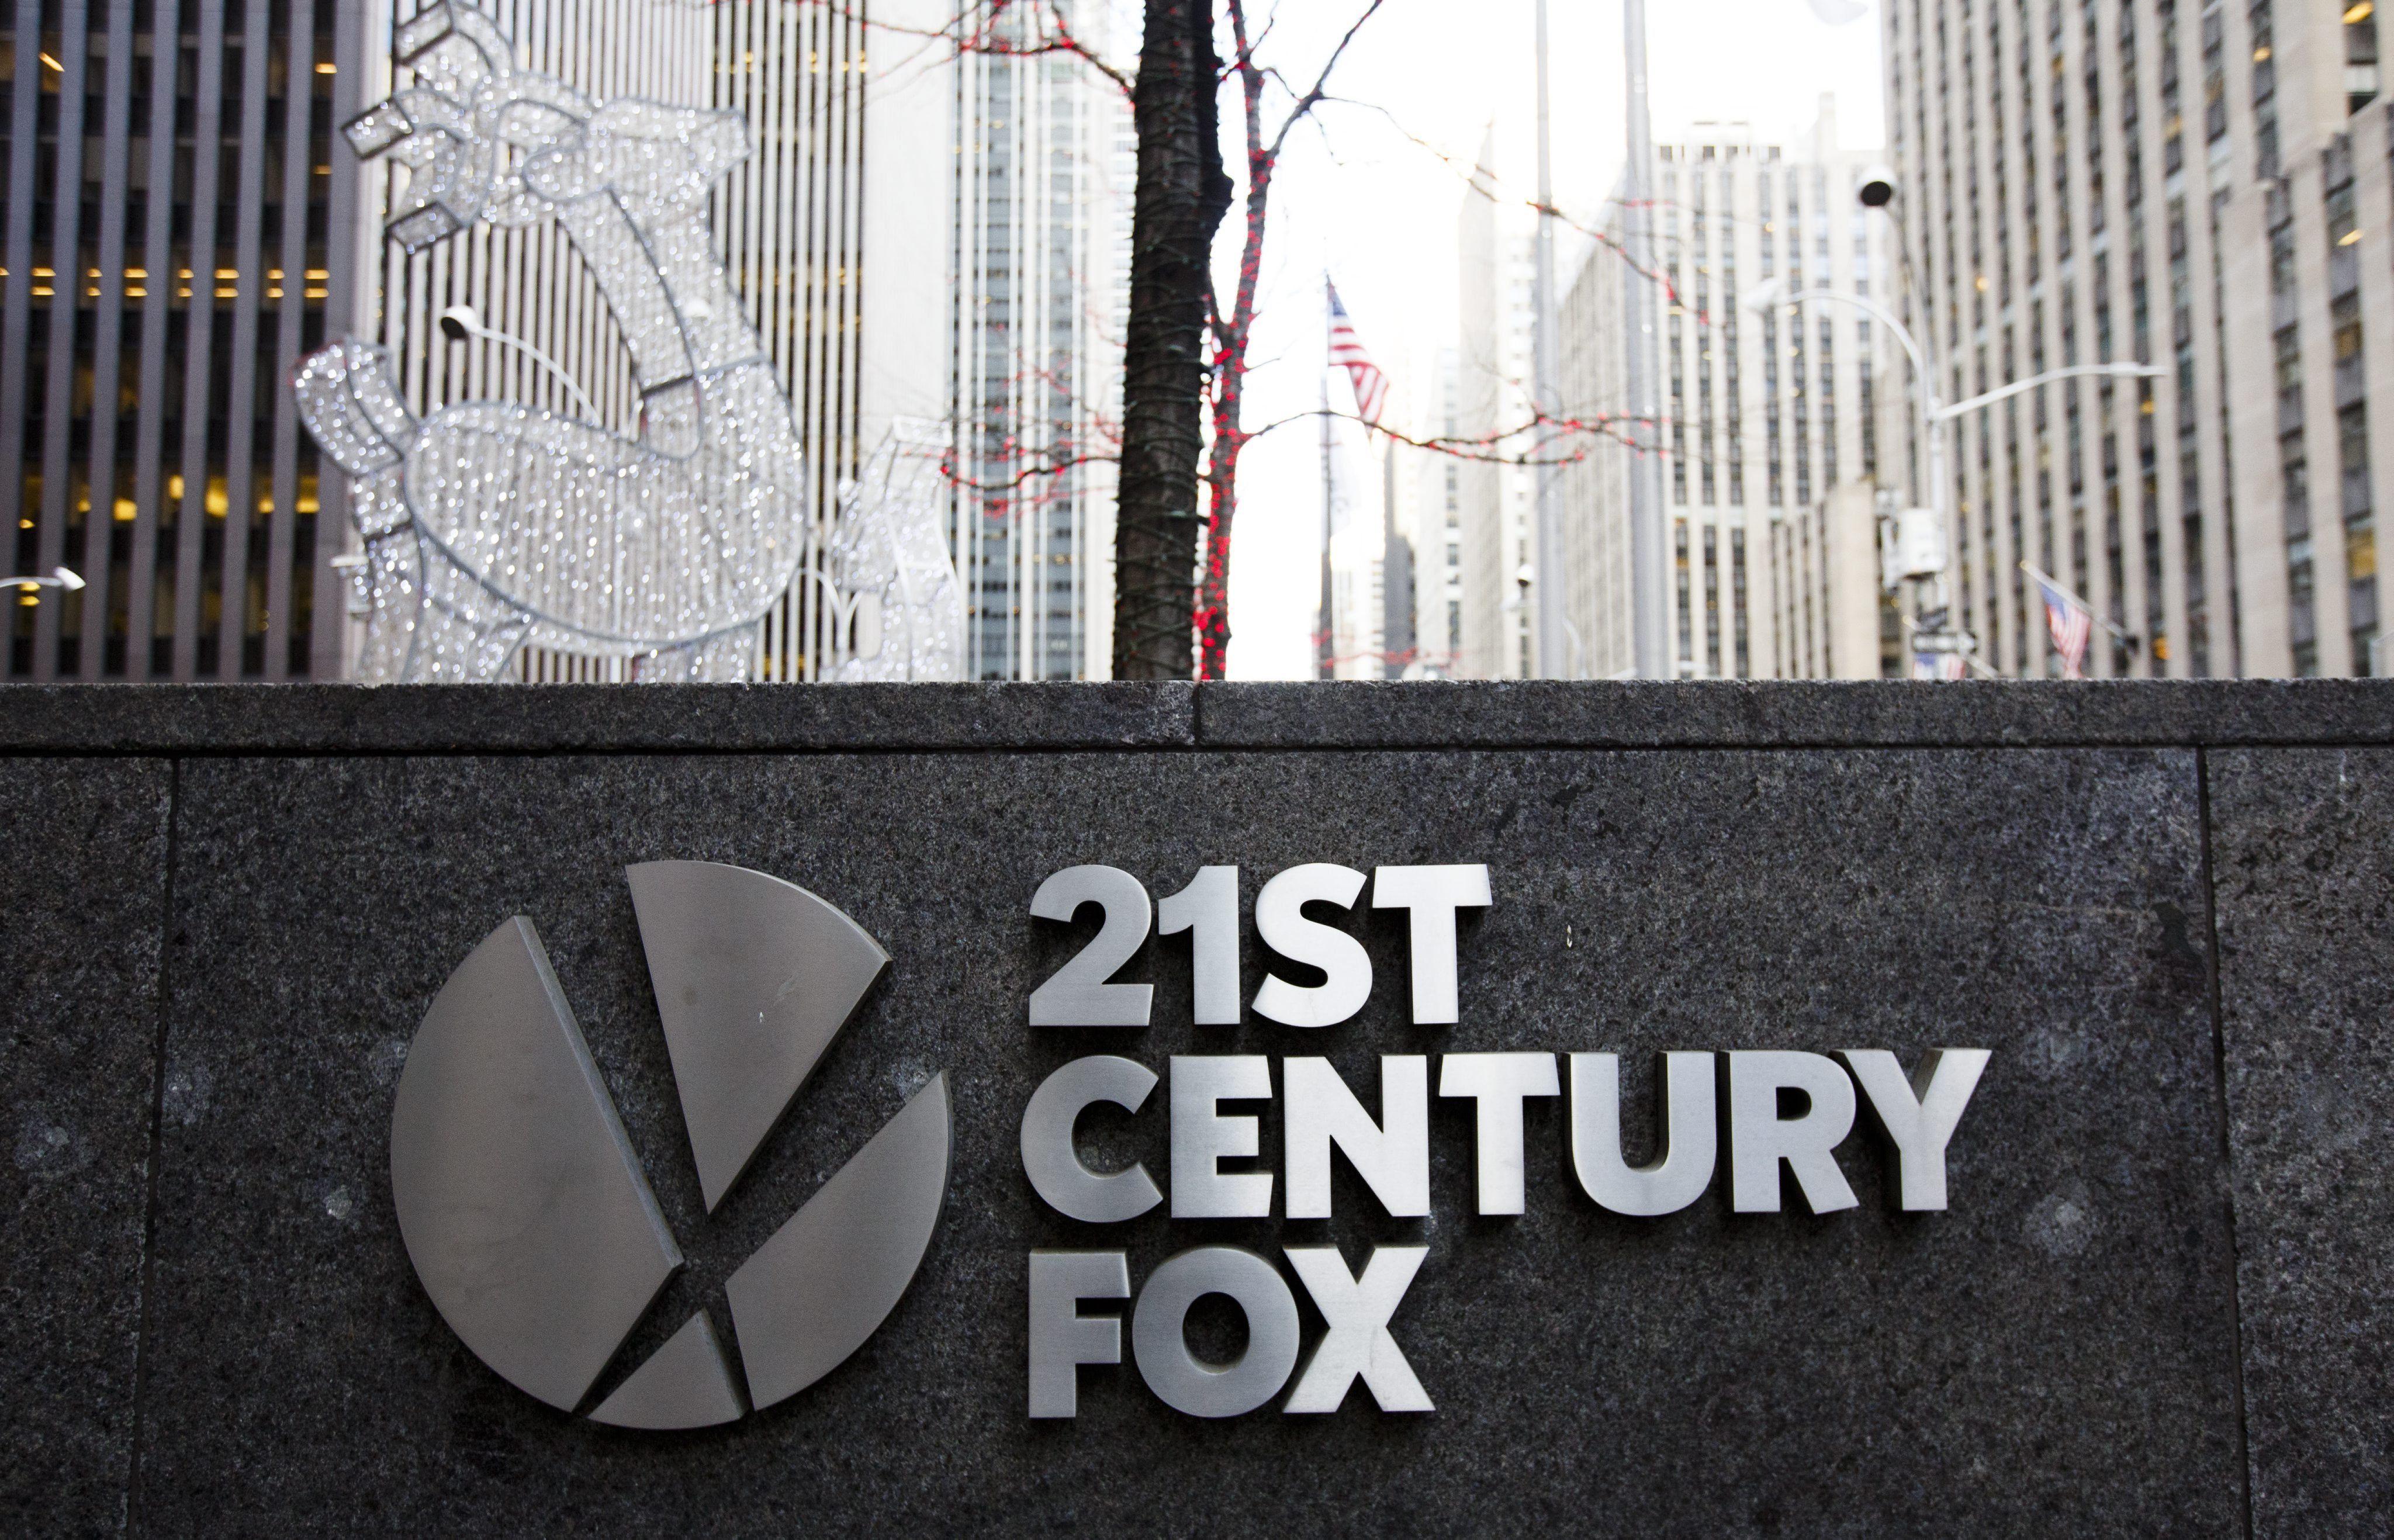 Century Cable Logo - Cable TV Business Buoys Earnings at 21st Century Fox - WSJ